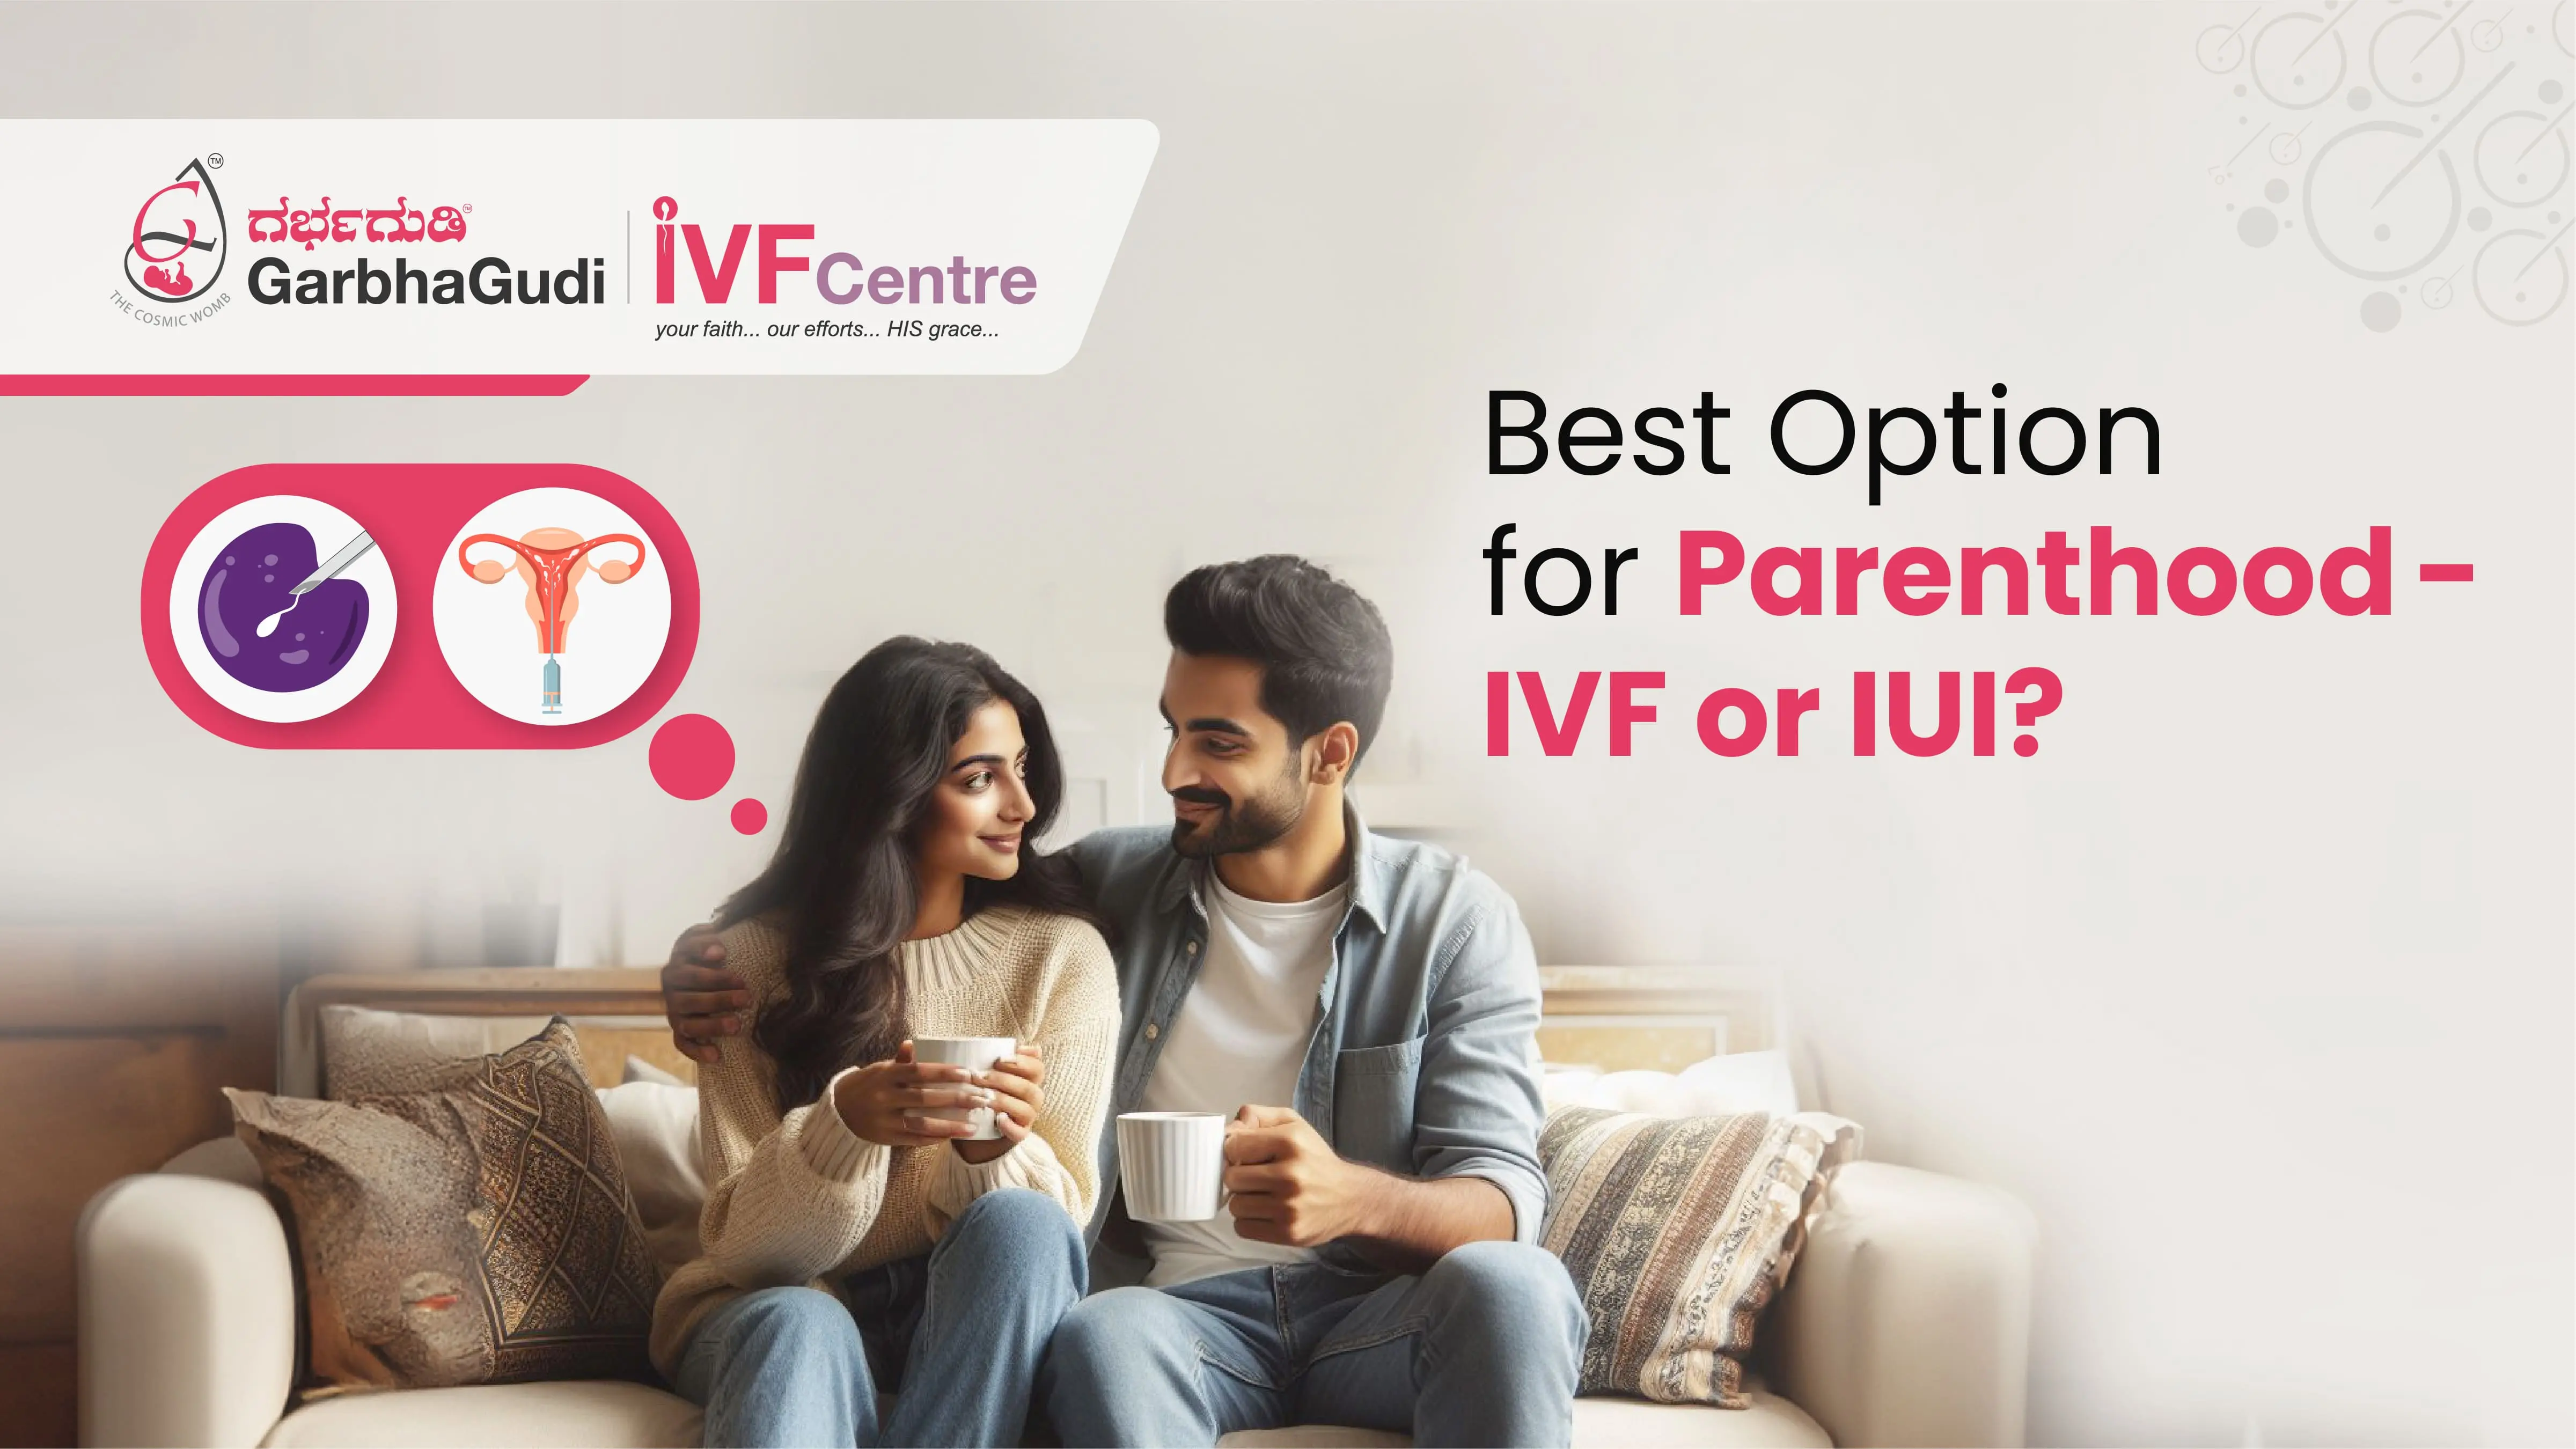 Best Option for Parenthood - IVF or IUI?